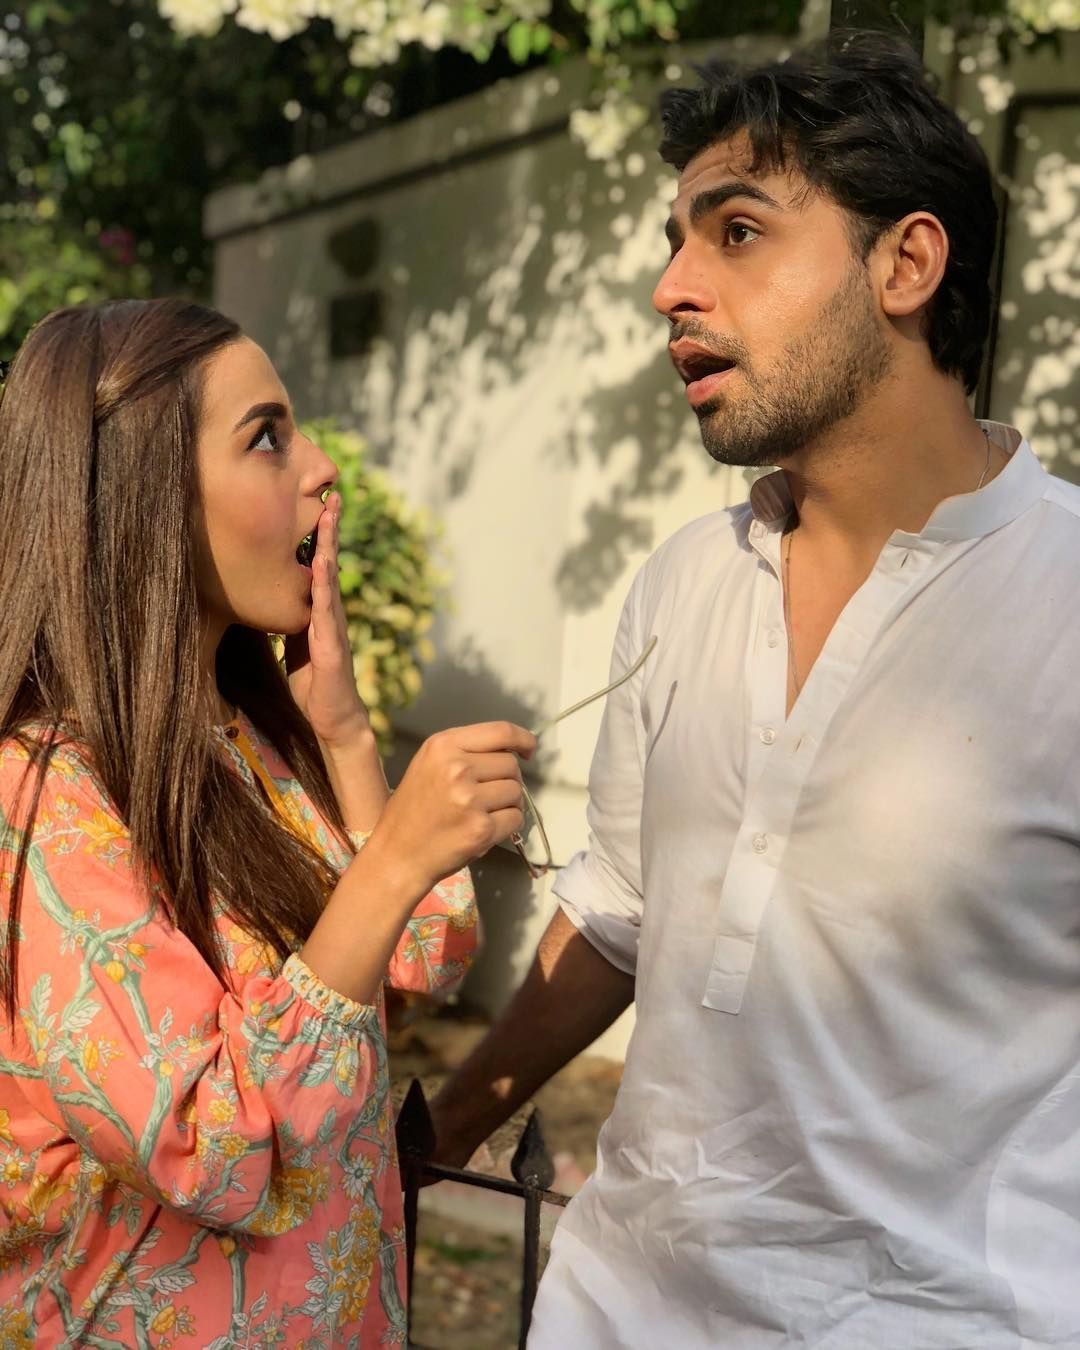 Twitter is speculating Iqra Aziz's wedding dress is 